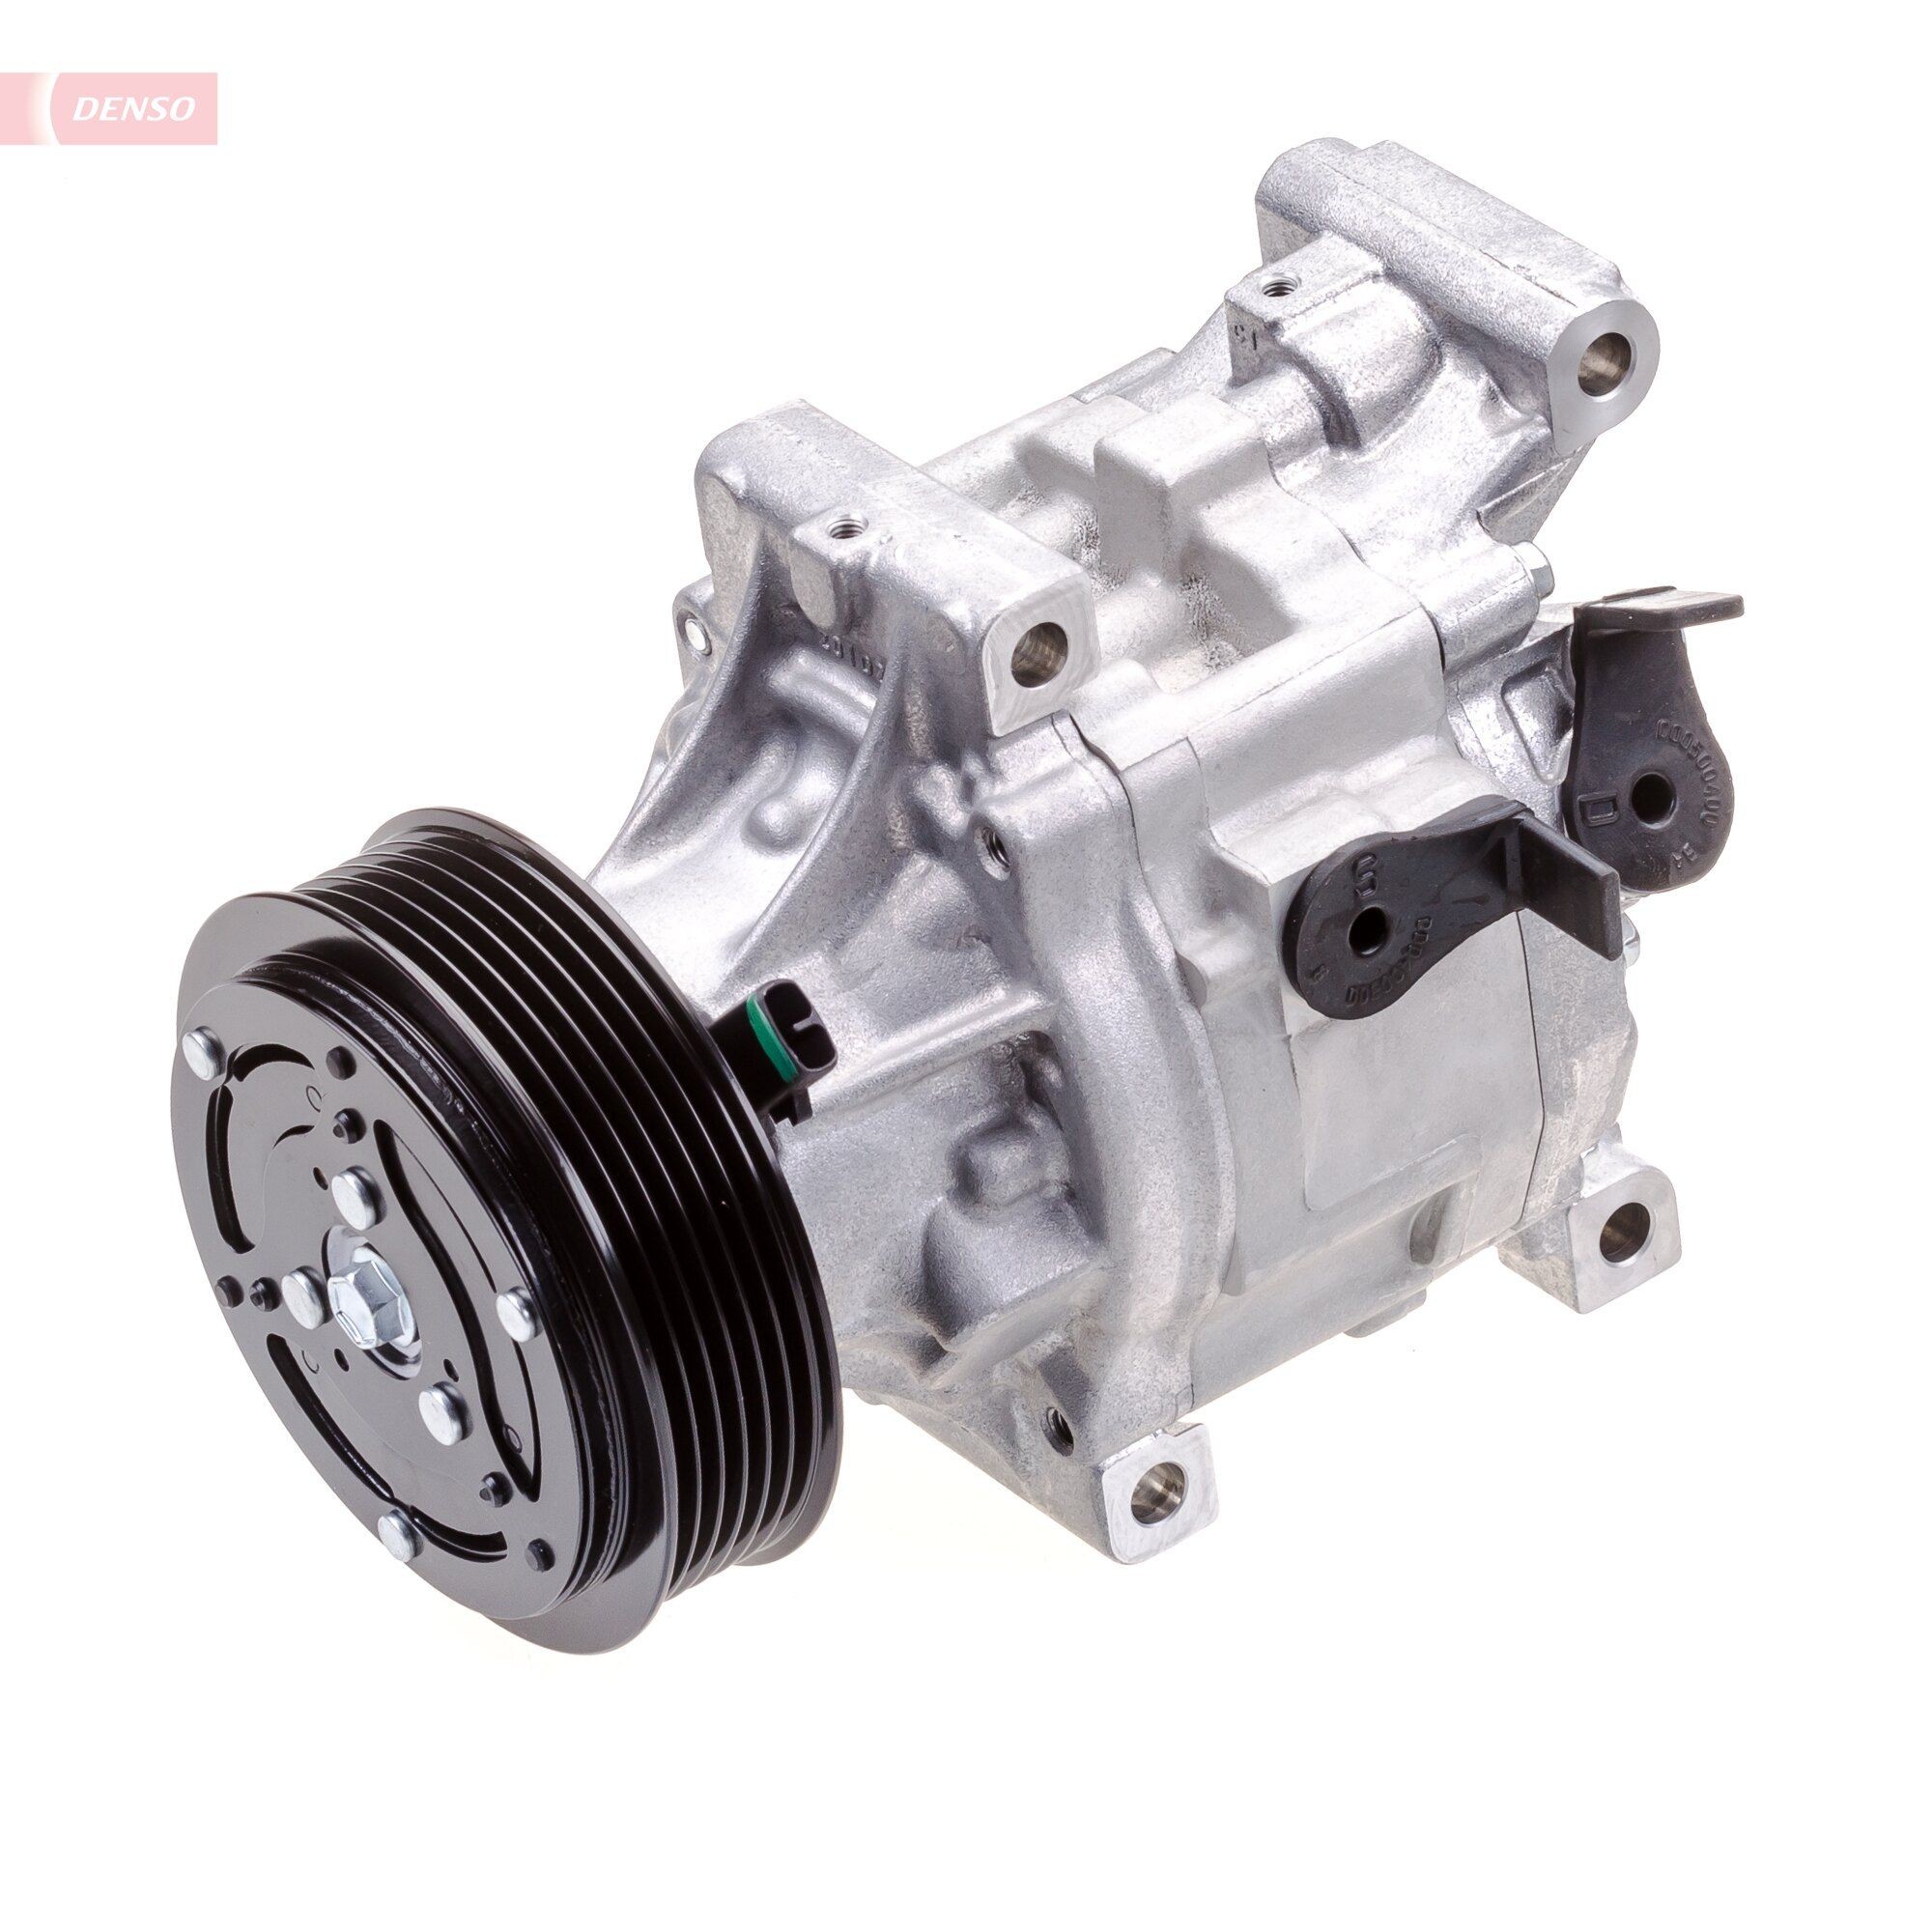 DENSO DCP09060 Air conditioning compressor SCSC06, 12V, PAG 46 YF, R 134a, R 1234yf, with magnetic clutch